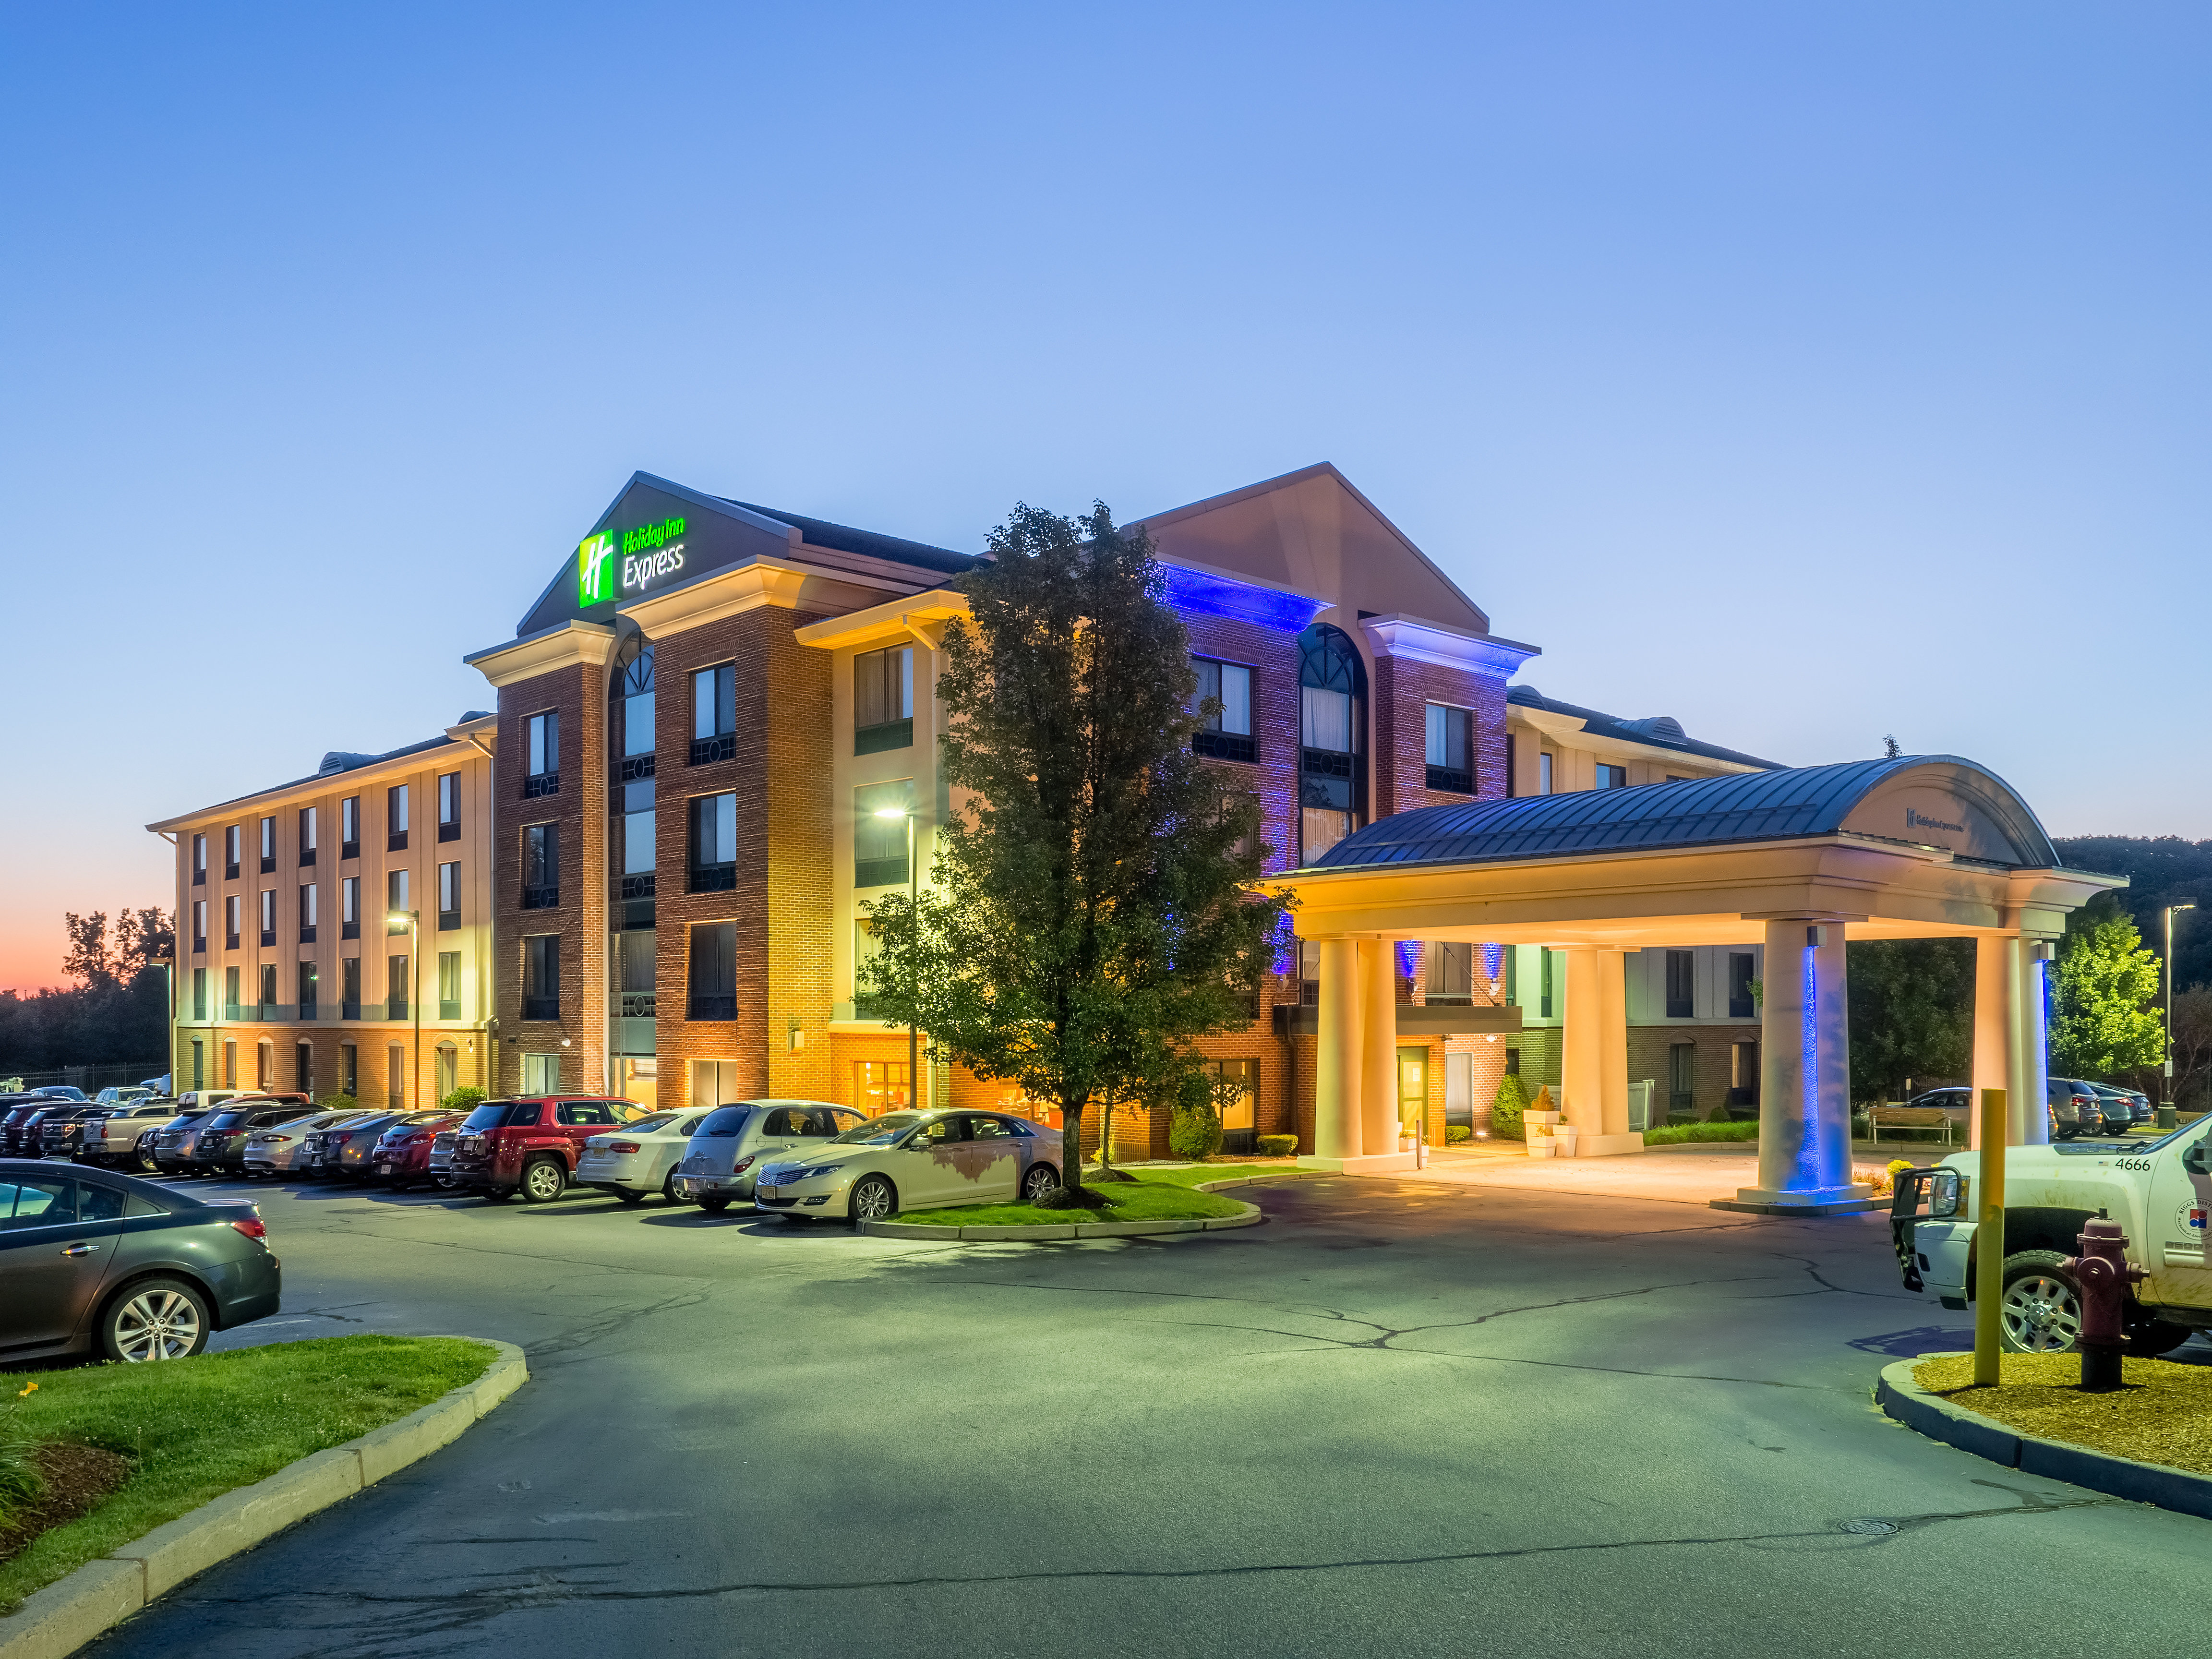 Welcome to the Holiday Inn Express Auburn near Worcester.